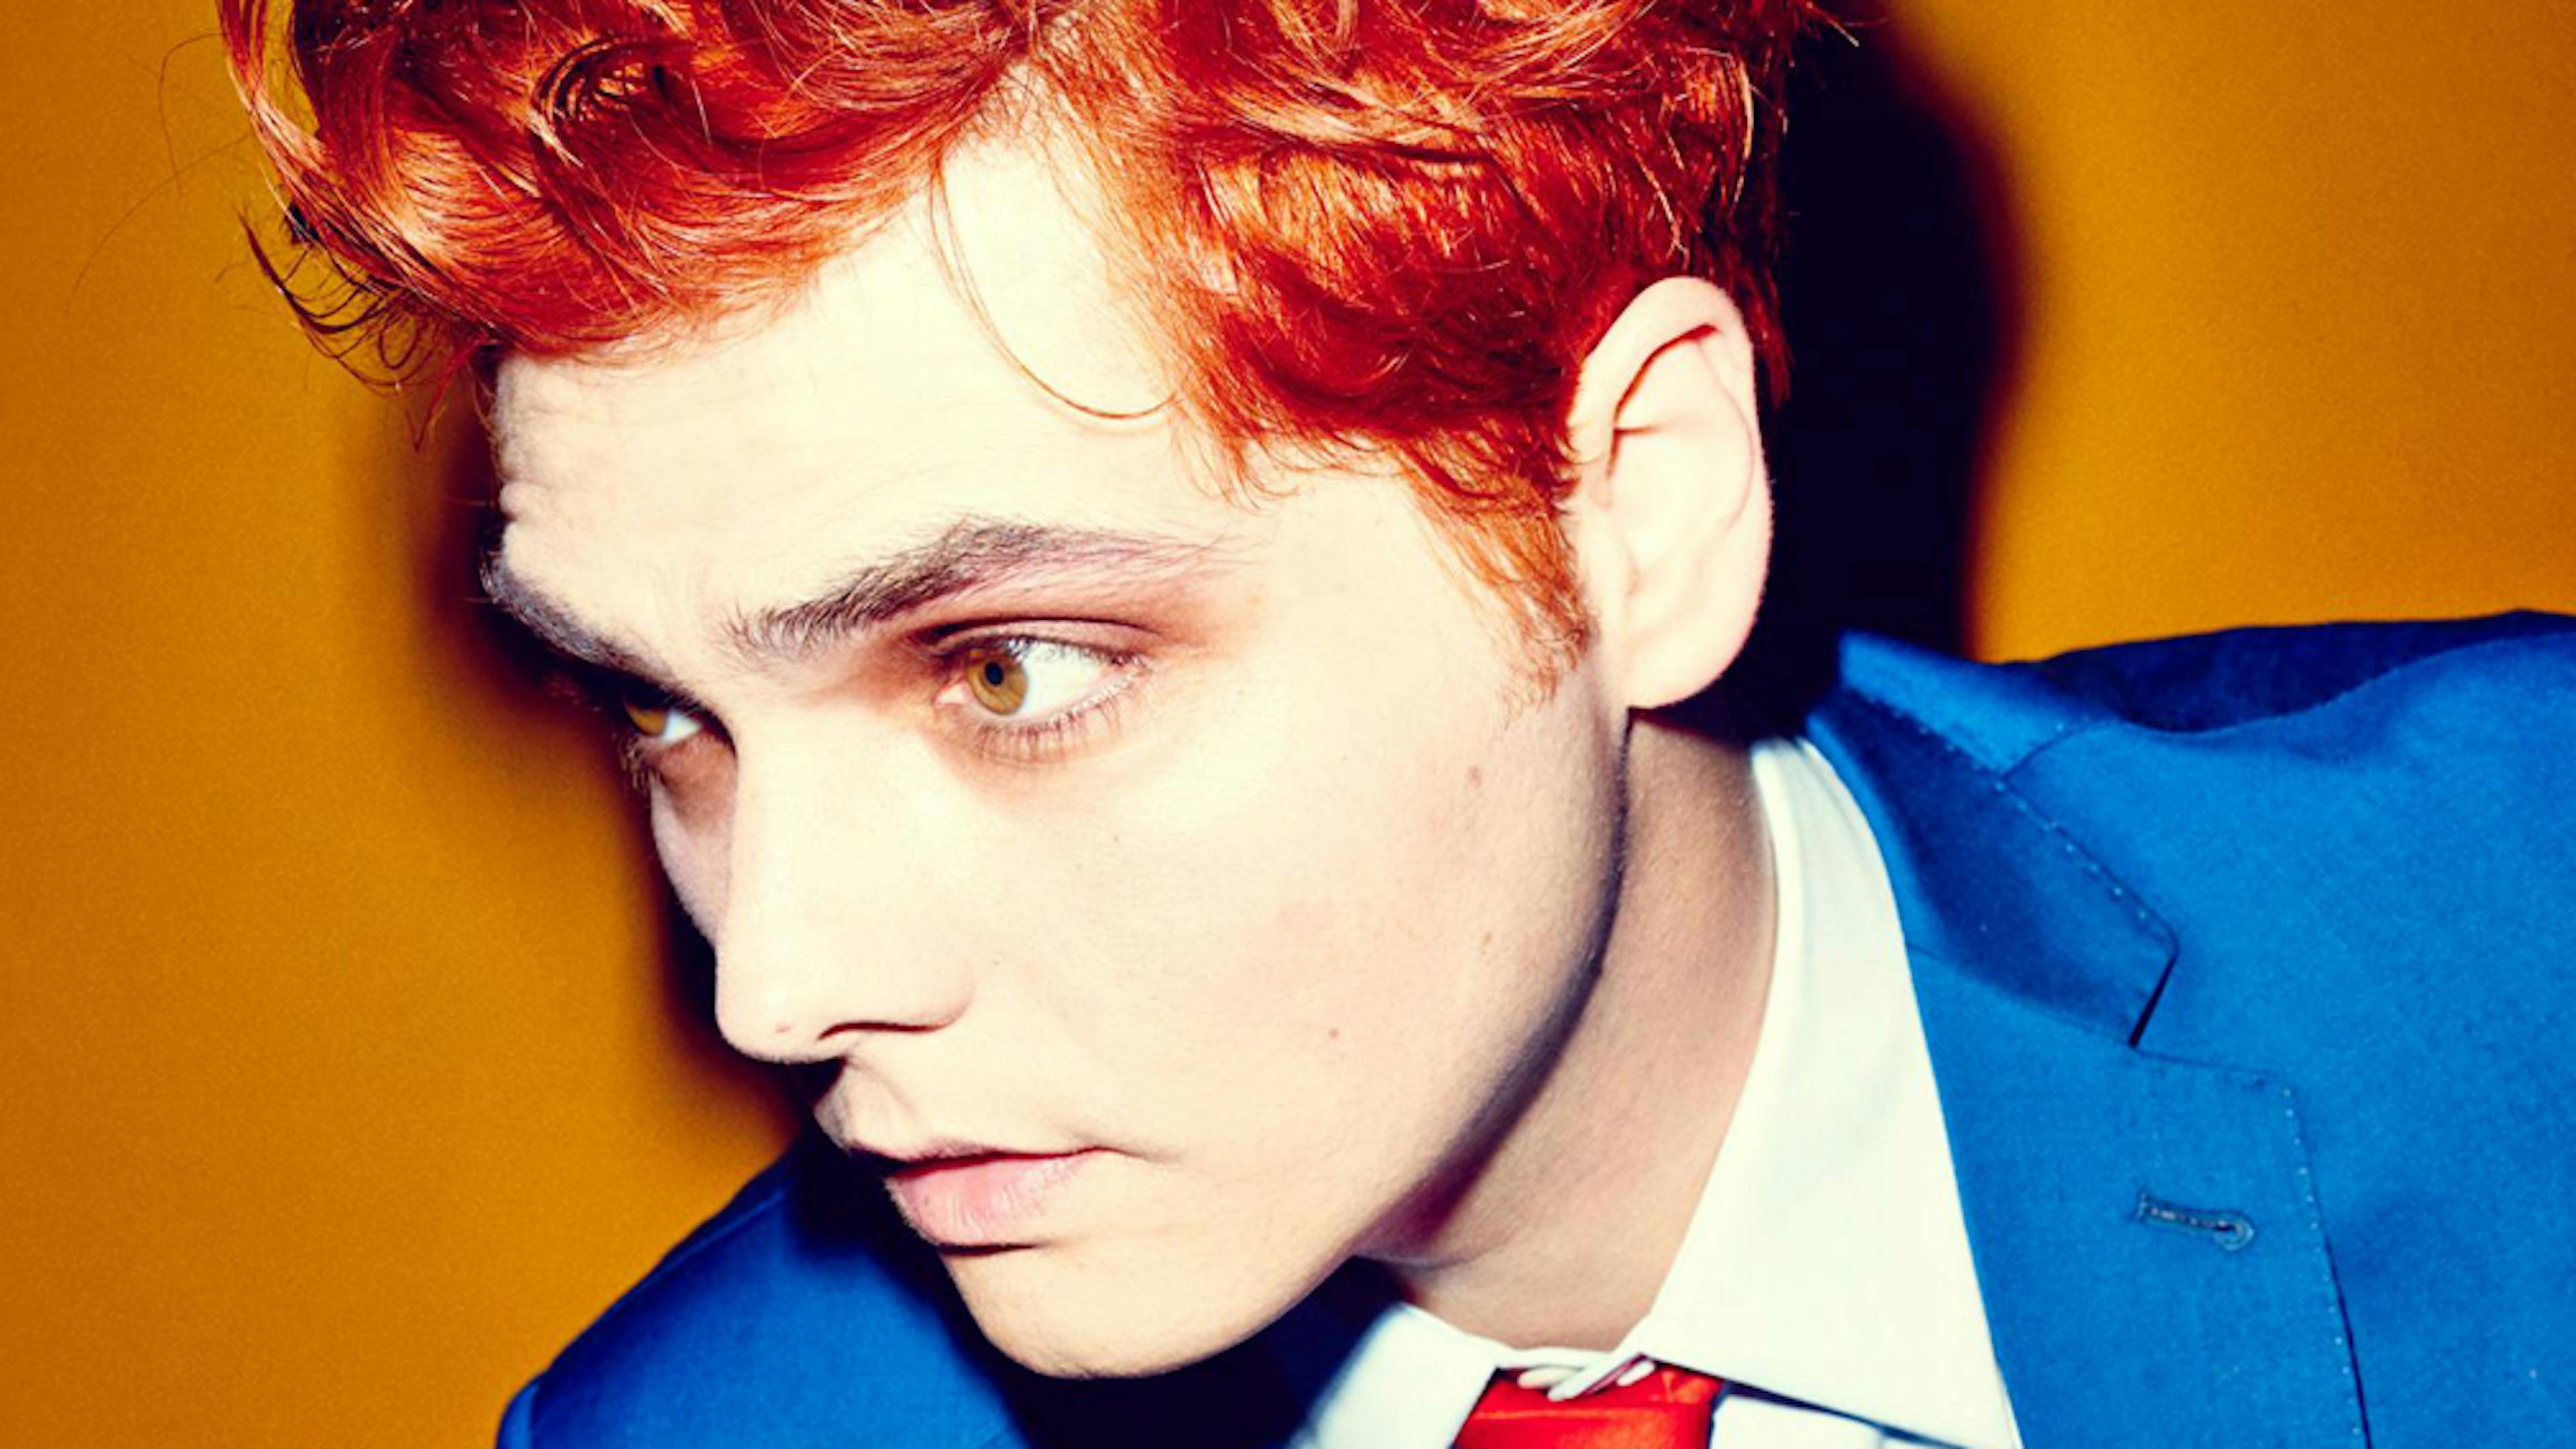 Gerard Way Discusses The Umbrella Academy And Writing New Music